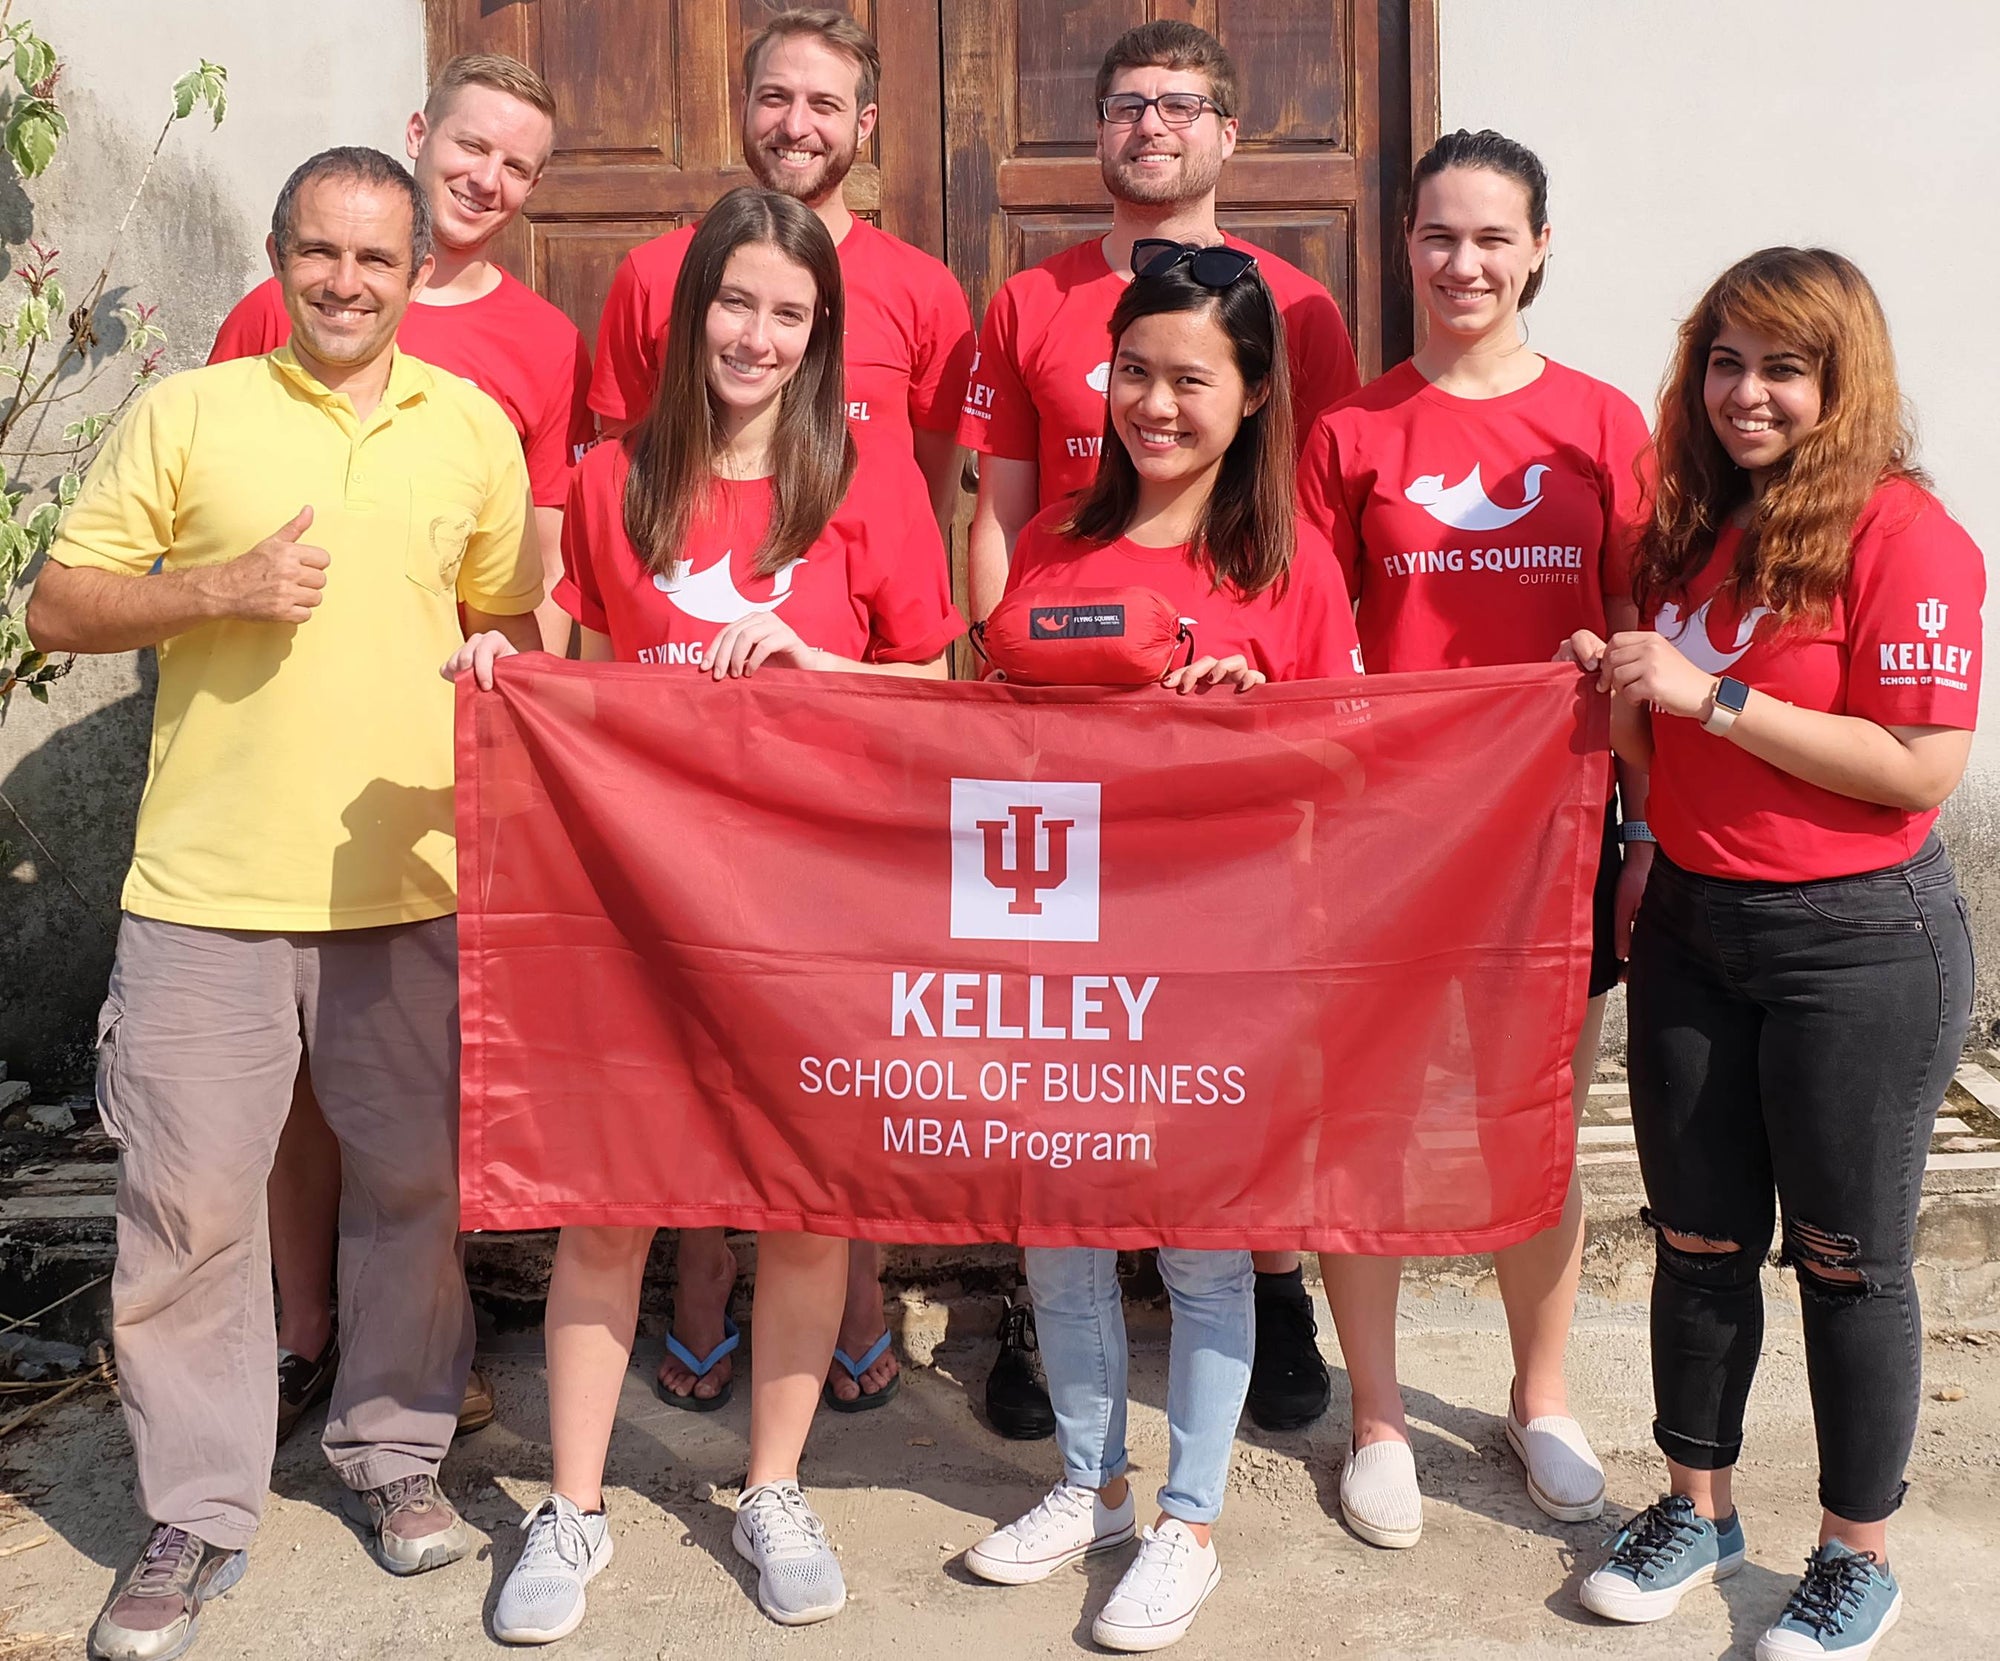 Indiana University Partners with FSO in Thailand